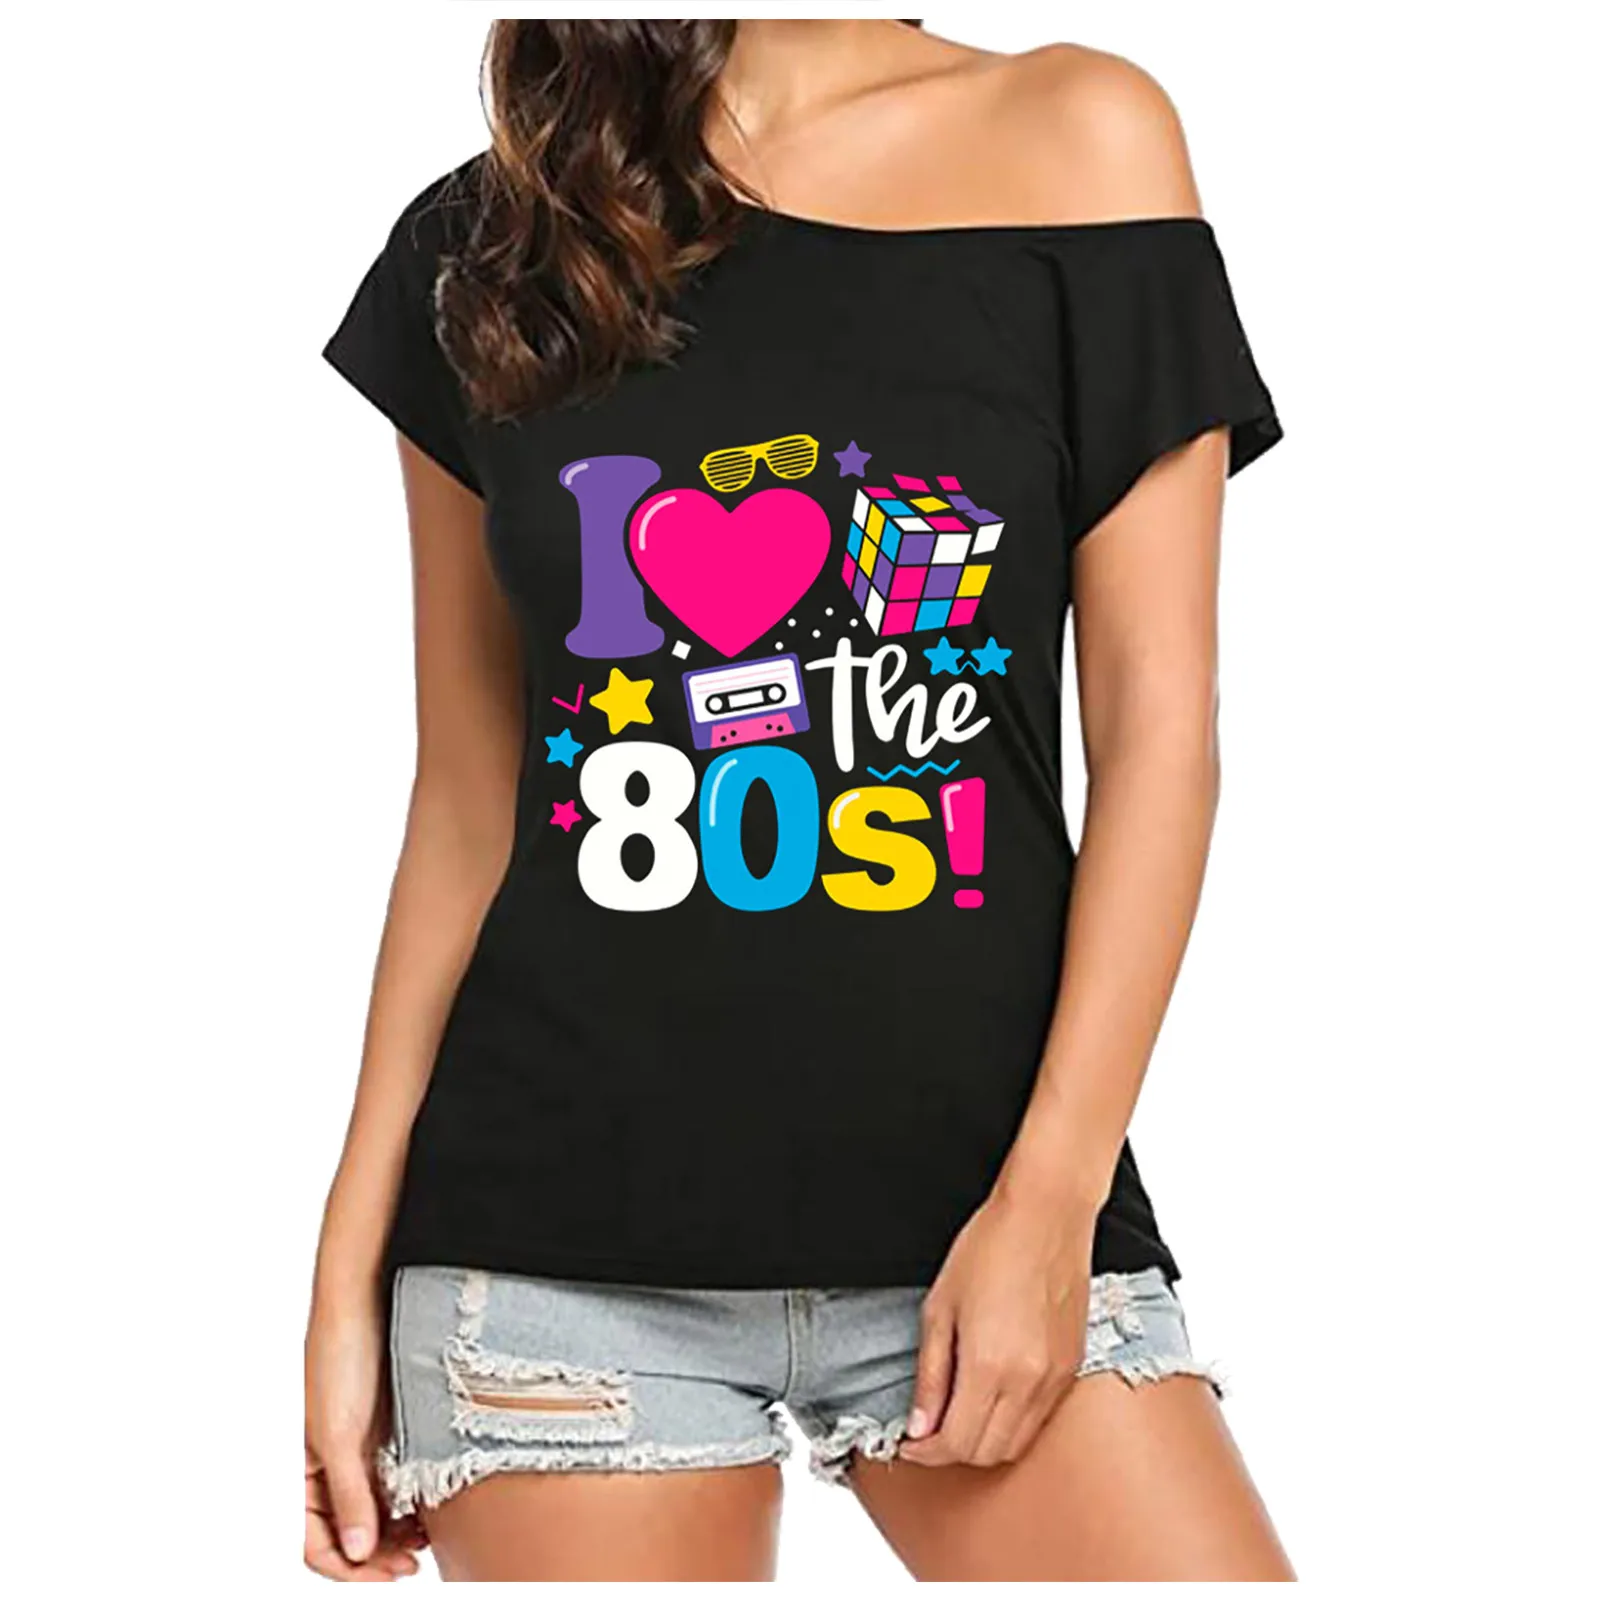 I Love The 80s Off The Shoulder Tops Female Summer Casual Short Sleeve Graphic Tees Streetwear Disco Costumes -S2273c060fdad4c36b6a6c7a3ae6eee71z